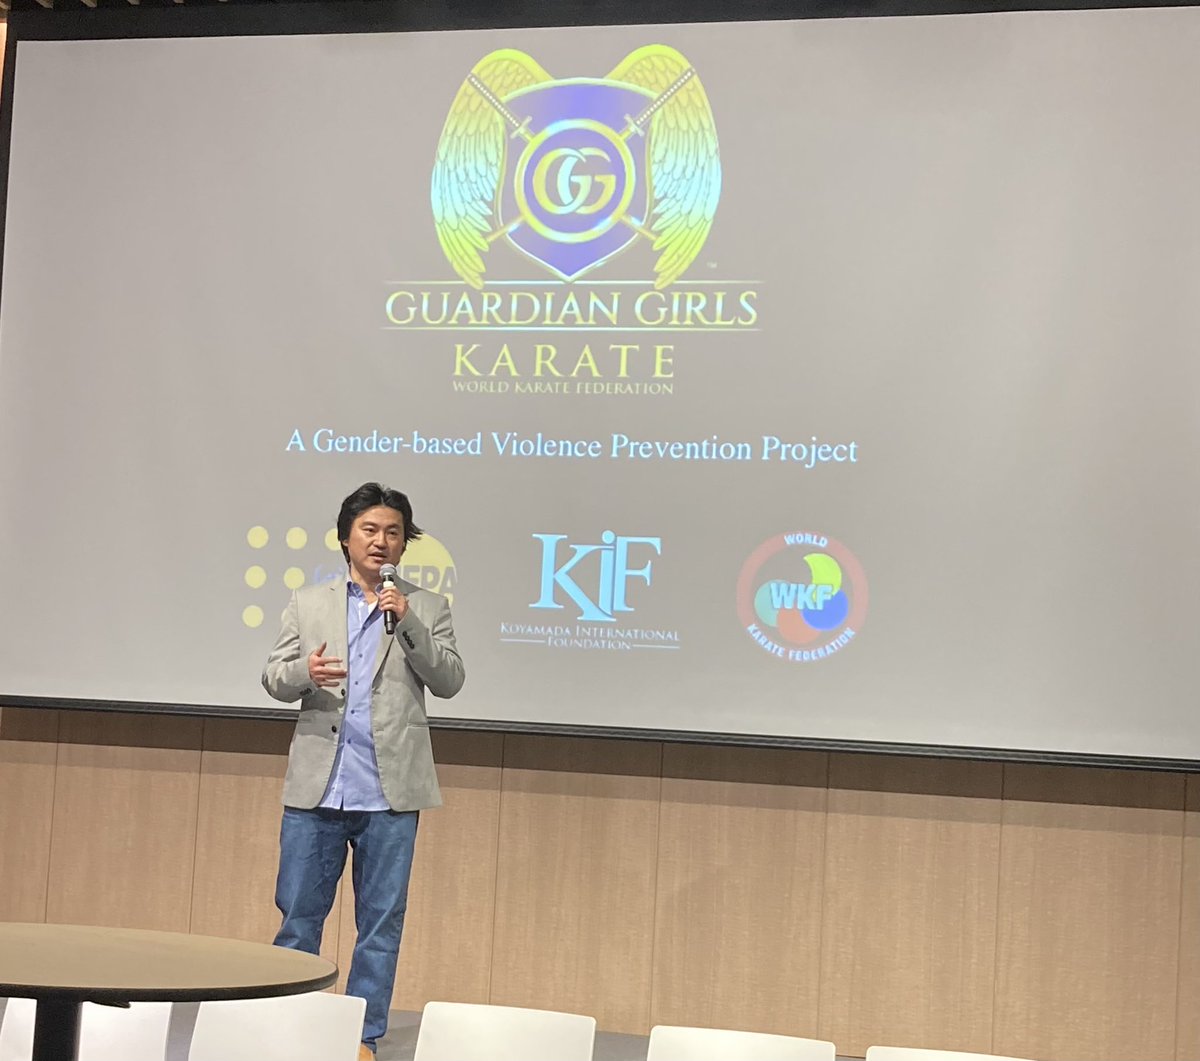 At @WAW_Japan Los Angeles event hosted by @JPNConsulateLA, my pleasure to stop by @JHLosAngeles in Hollywood and present @GuardianGirlsX Karate to over 50 women leaders from LA. #GuardianGirls Karate in the U.S. is led by @KIF_US in partnerships with @WorldKarate_WKF and @UNFPA.